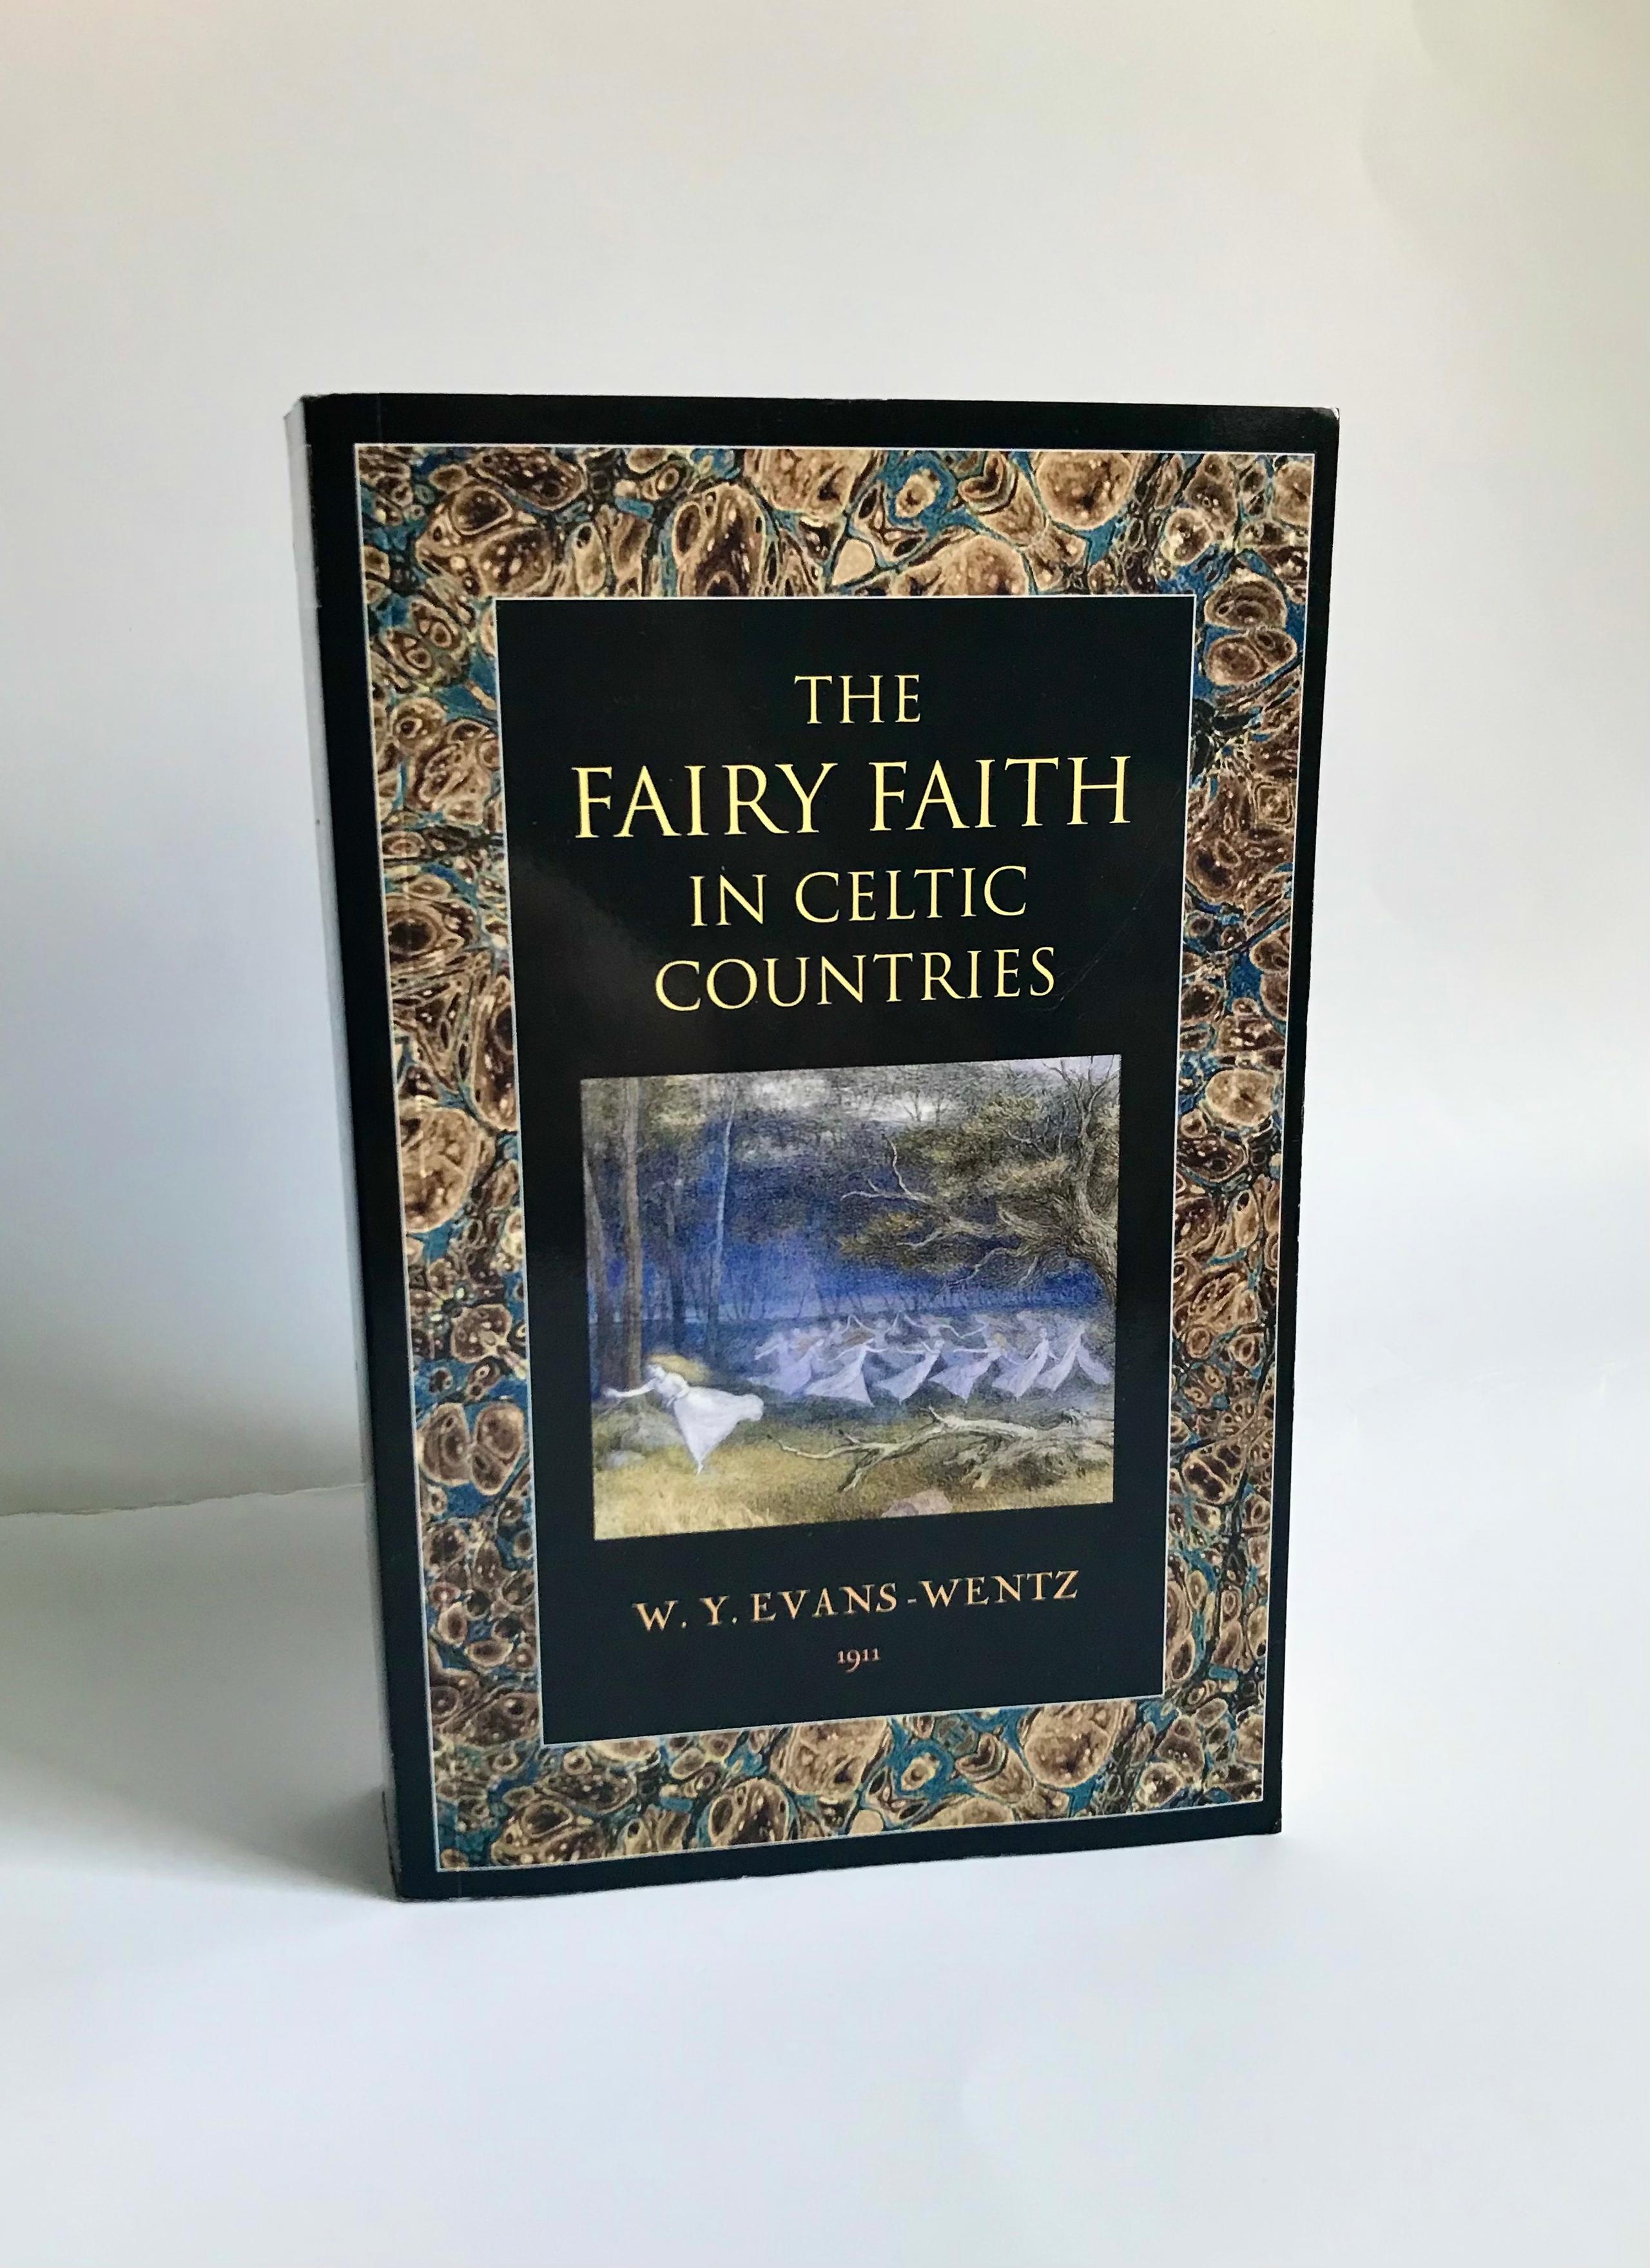 The Fairy Faith In Celtic Countries by W. Y. Evans-Wentz